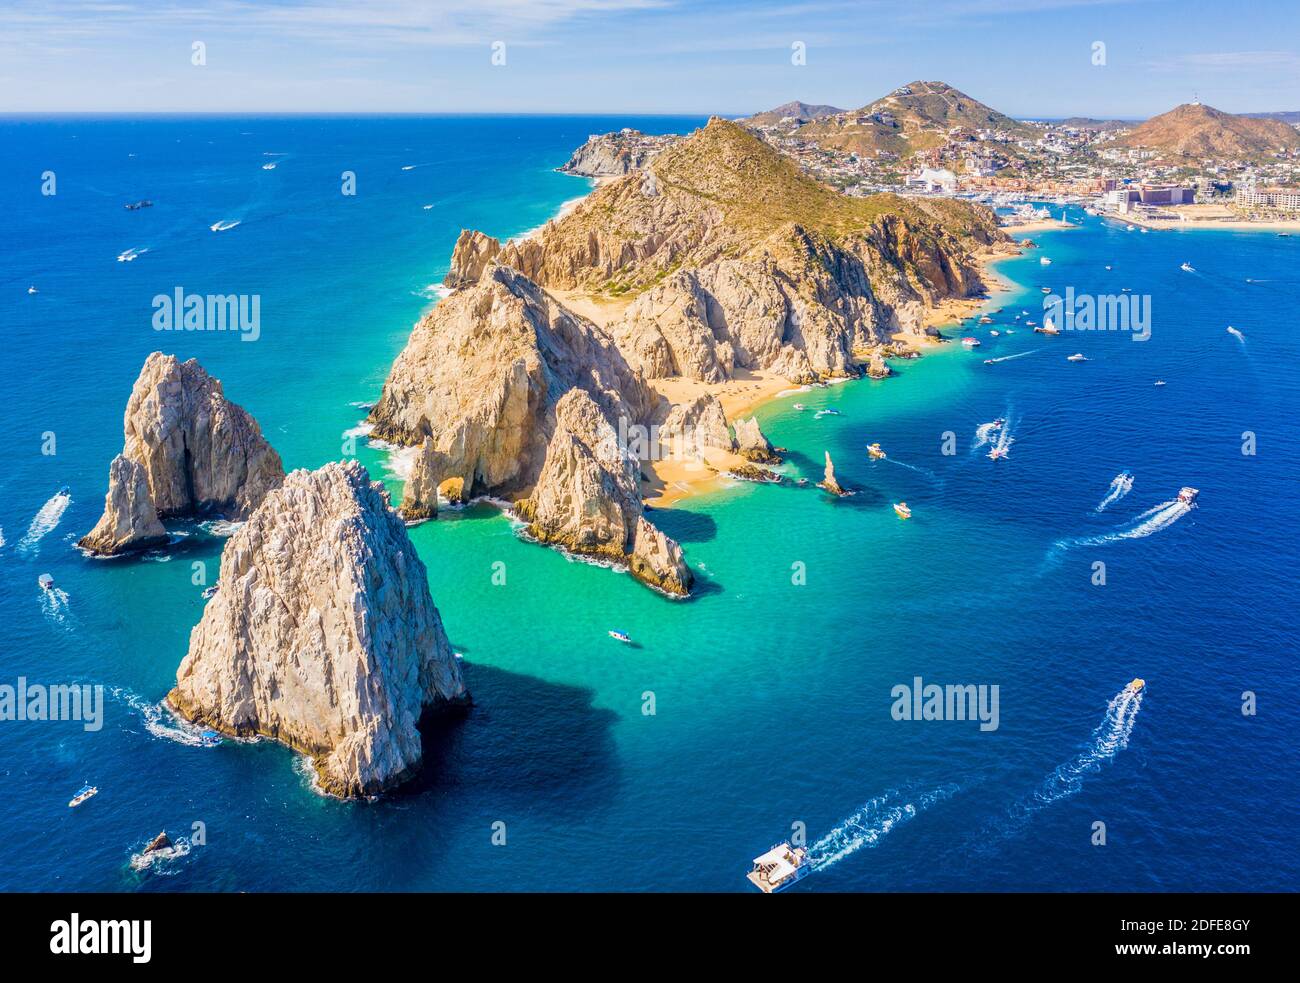 Aerial view of Lands End and the Arch of Cabo San Lucas, Baja California Sur, Mexico, where the Gulf of California meets the Pacific Ocean Stock Photo